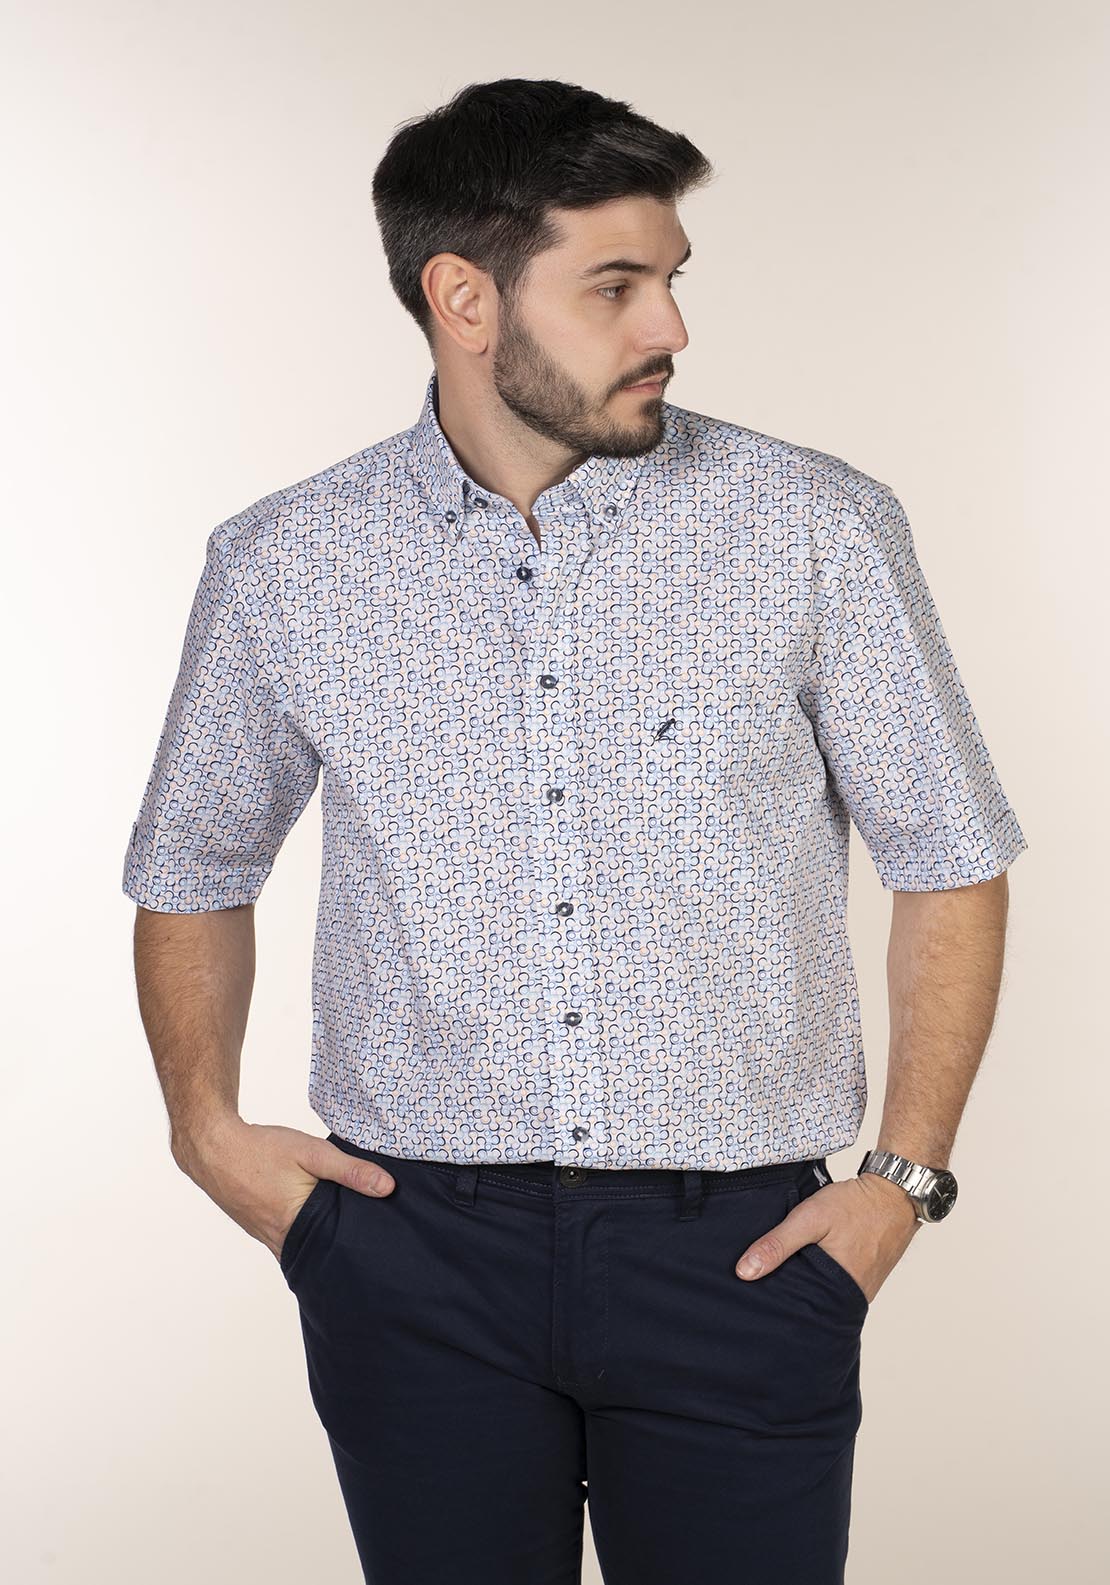 Yeats Casual Patterned Short Sleeve Shirt 5 Shaws Department Stores